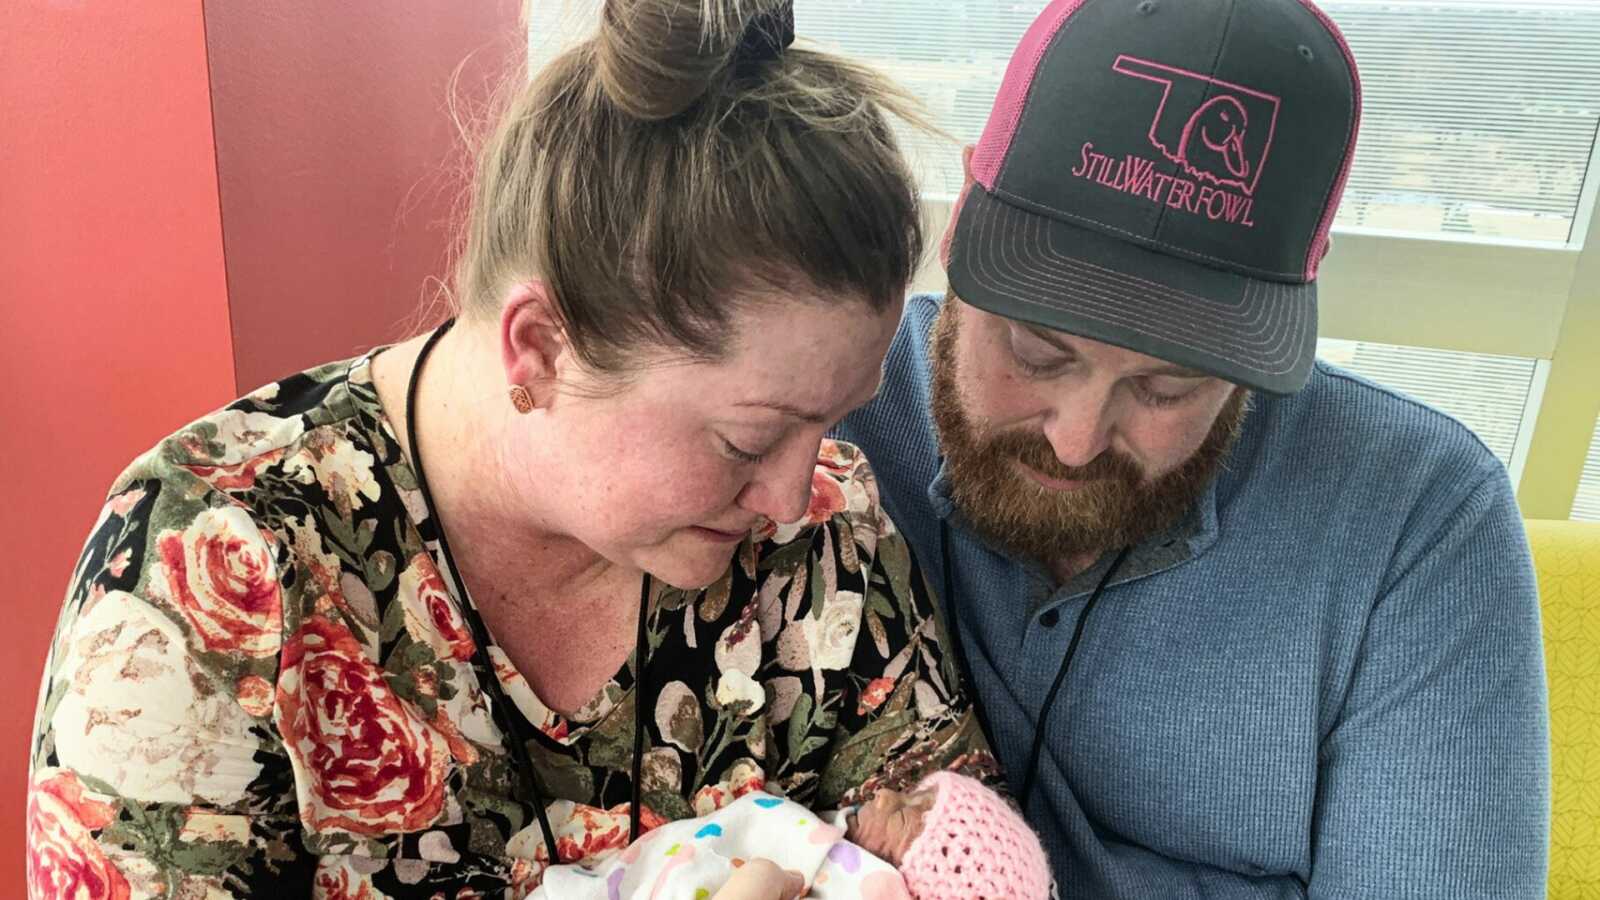 Parents crying while holding newborn in hospital